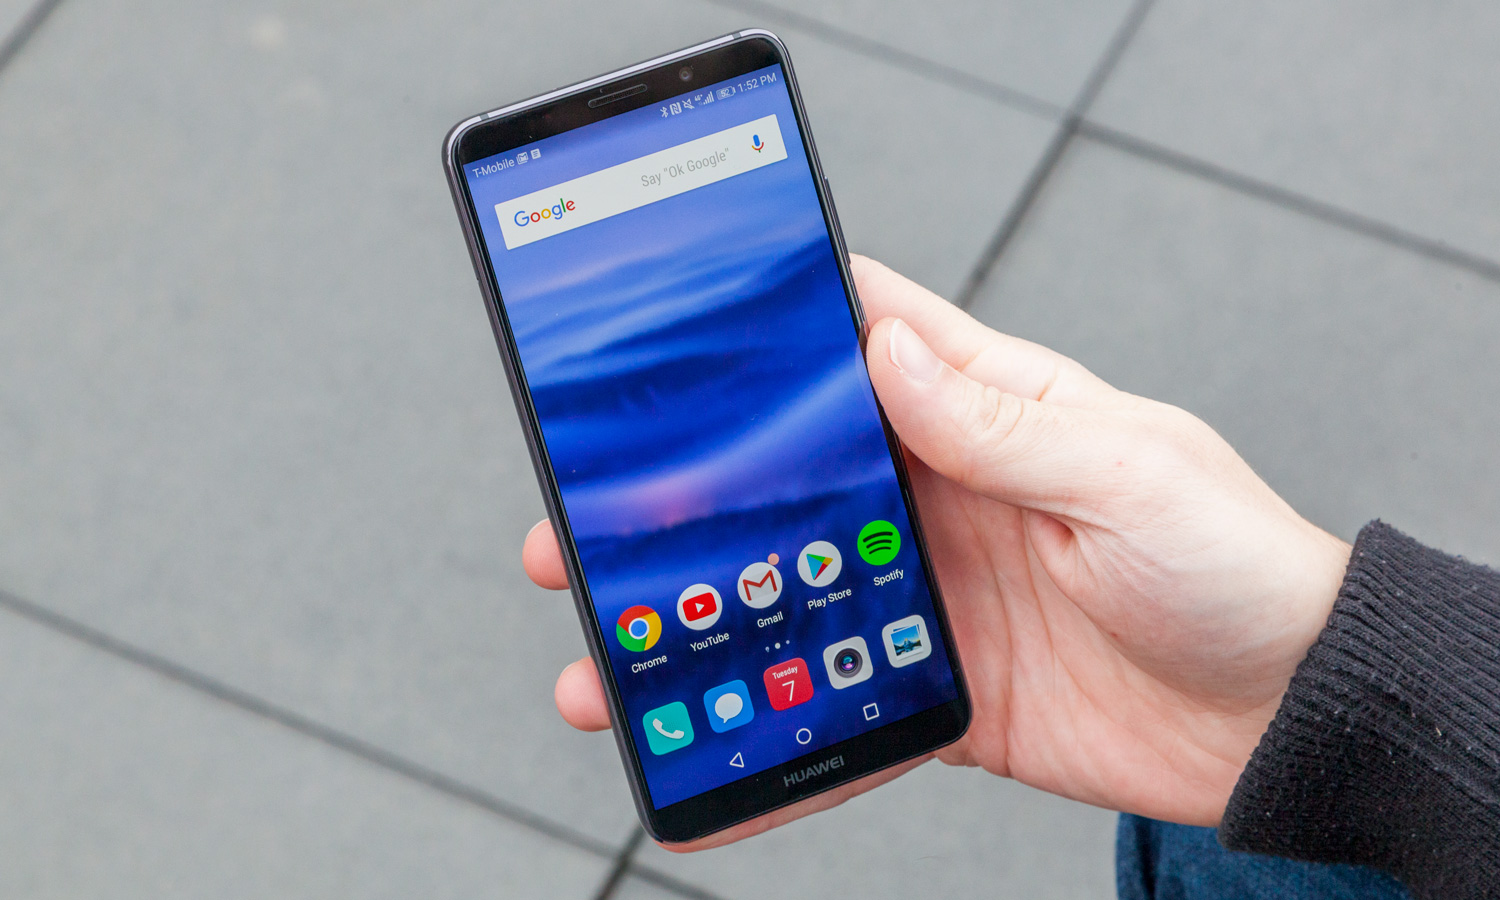 Mate 10 Pro review: It's got the power, camera and charm - CNET